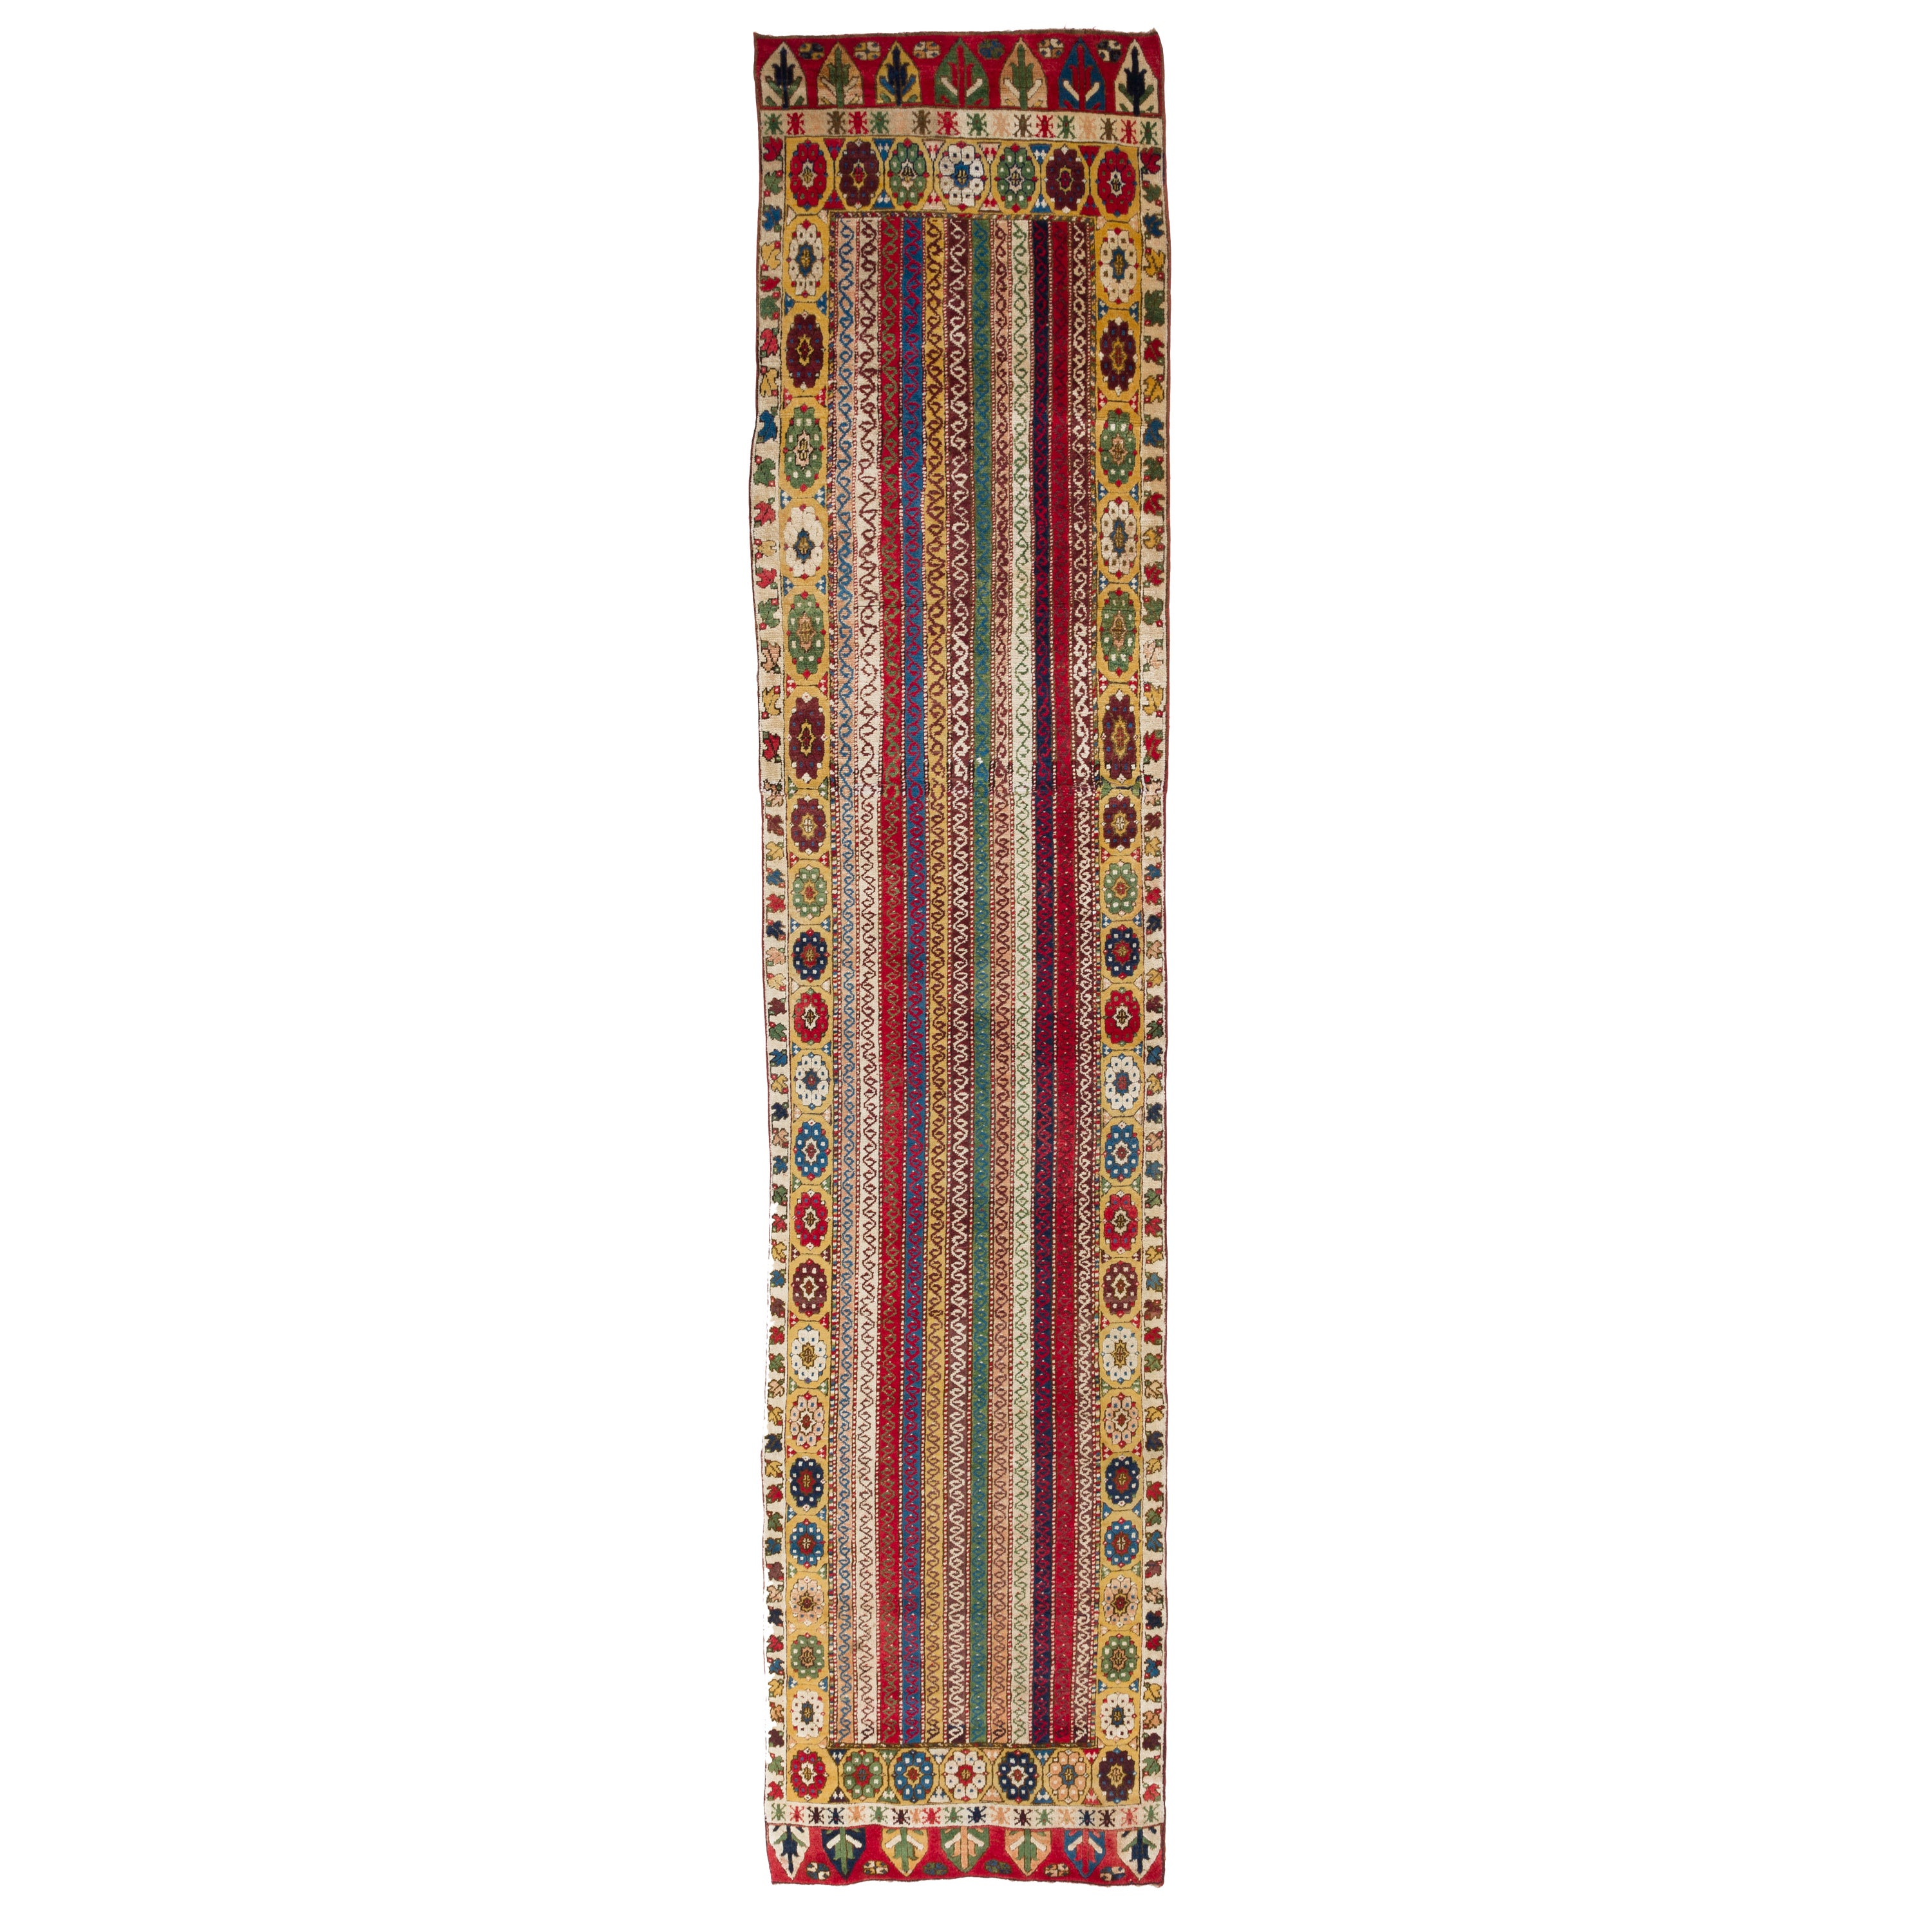 3.2x14.4 Ft Handmade Runner Rug from Konya / Turkey. All Wool and Natural Dyes